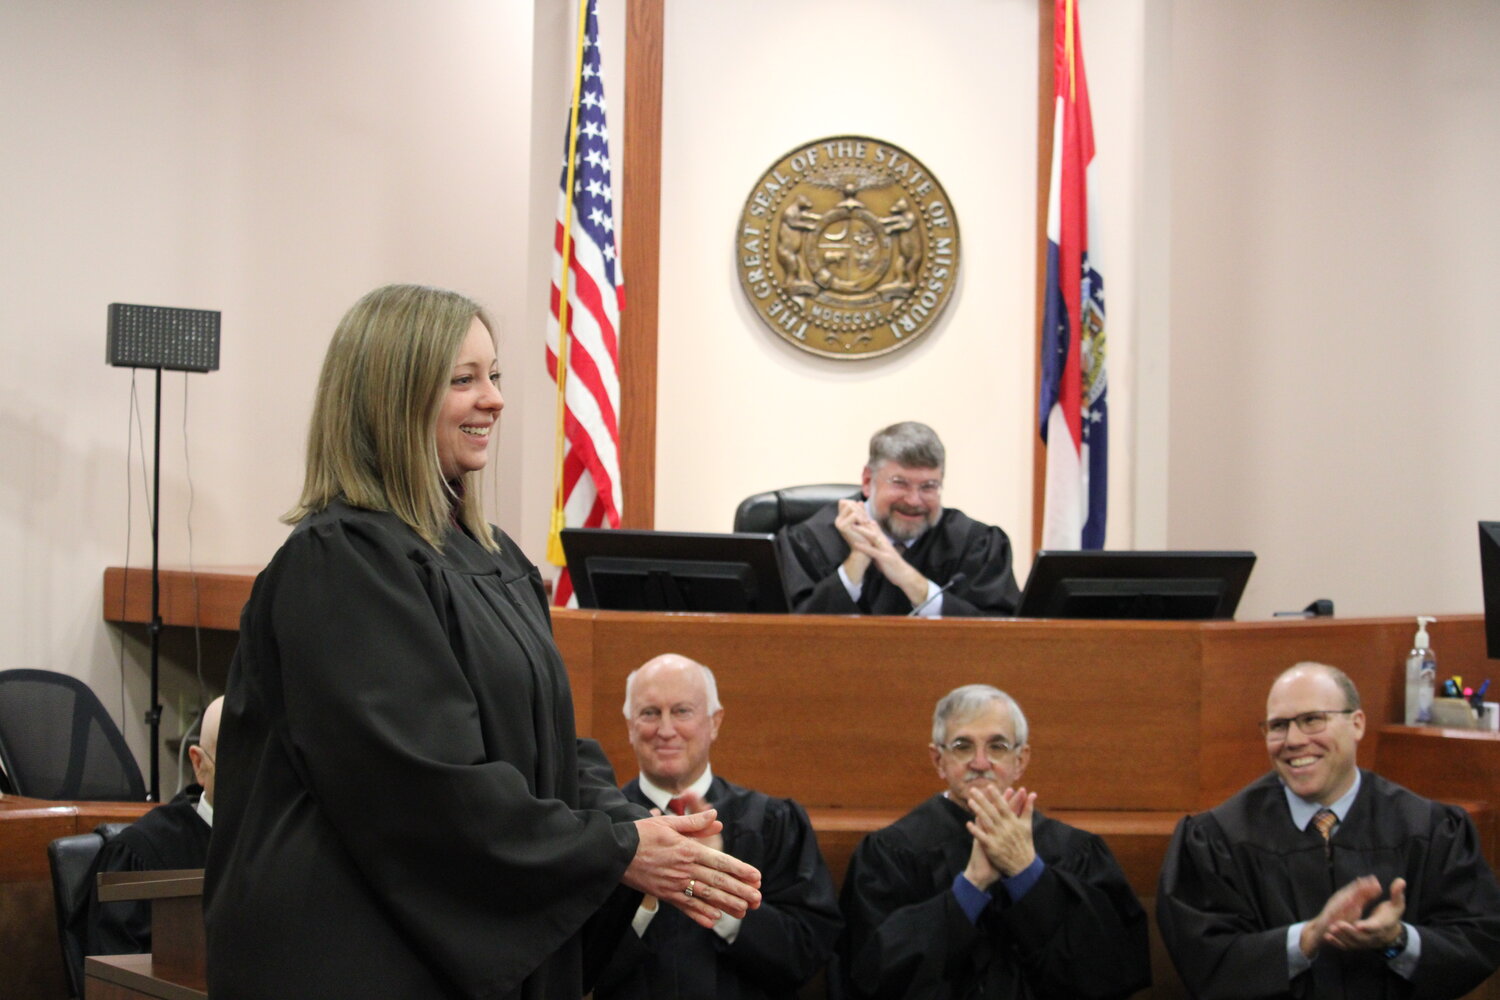 New Judge Katie Joyce addresses the crowd at the end of the installation ceremony.